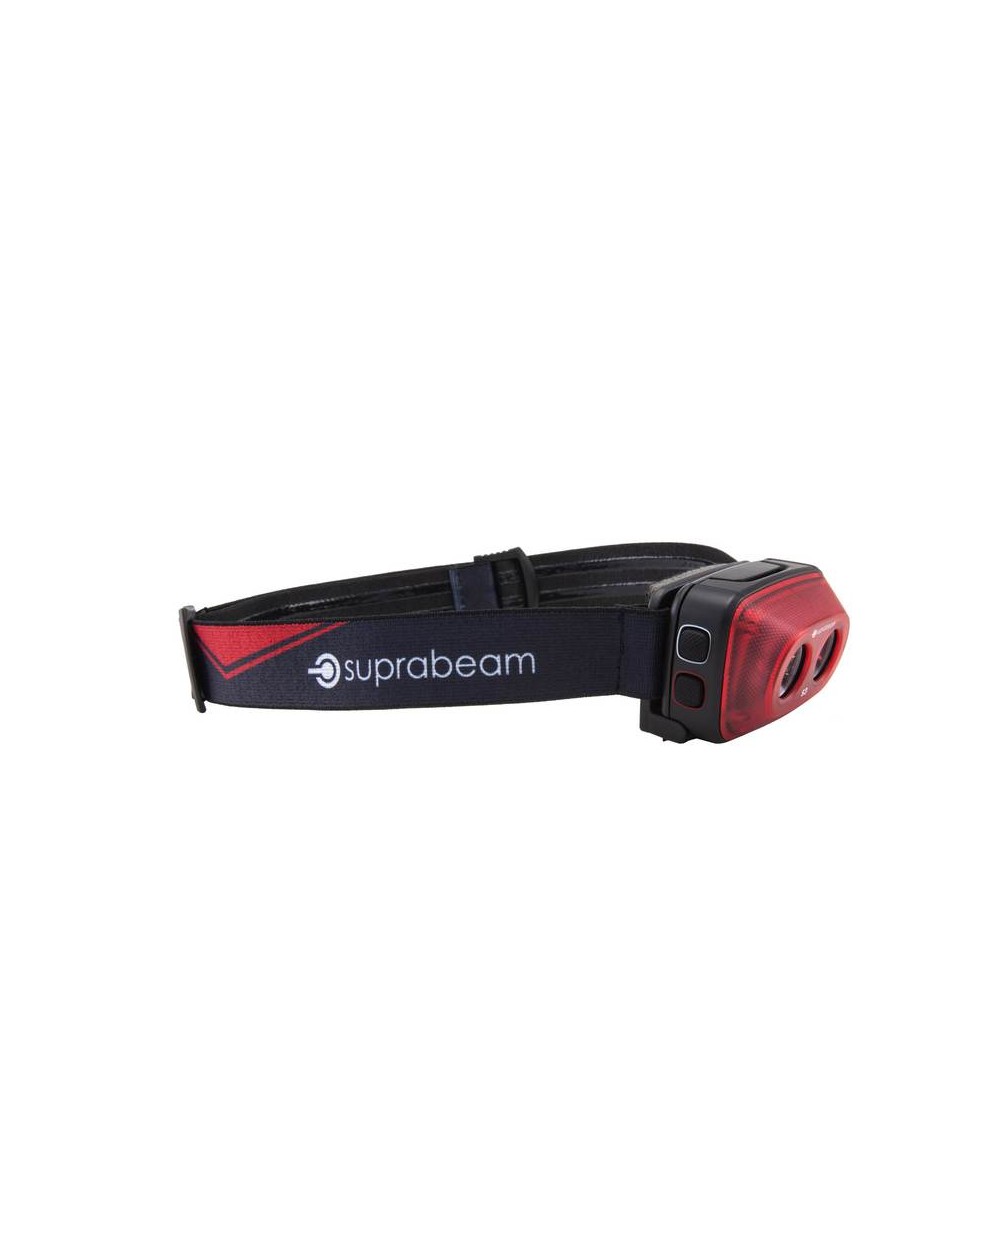 Lampe frontale 200 lumens rechargeable S3r Suprabeam